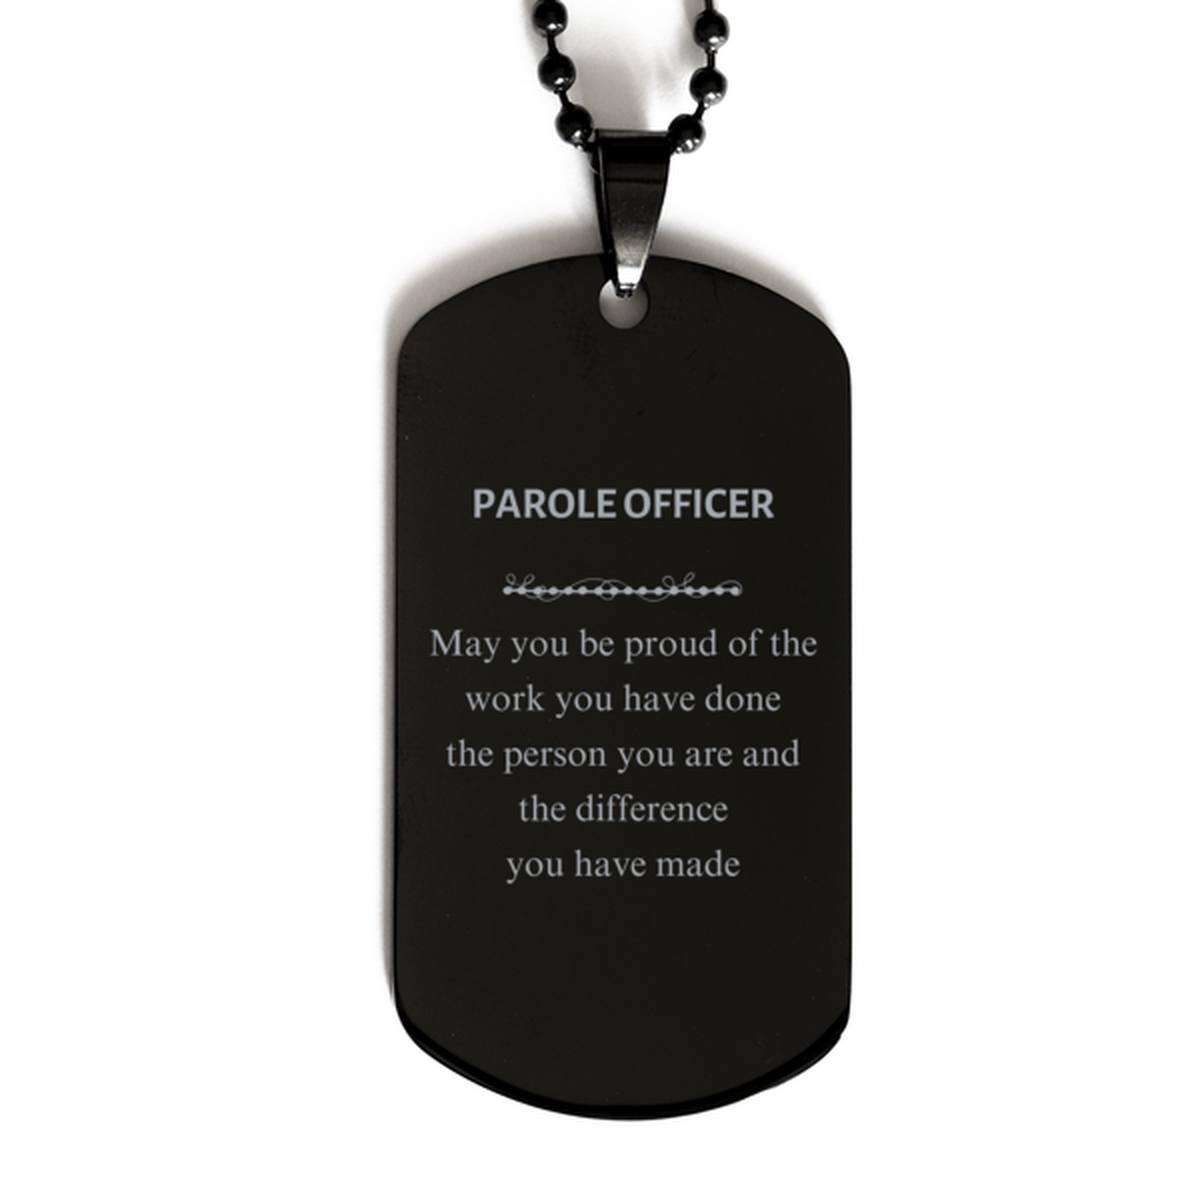 Parole Officer May you be proud of the work you have done, Retirement Parole Officer Black Dog Tag for Colleague Appreciation Gifts Amazing for Parole Officer